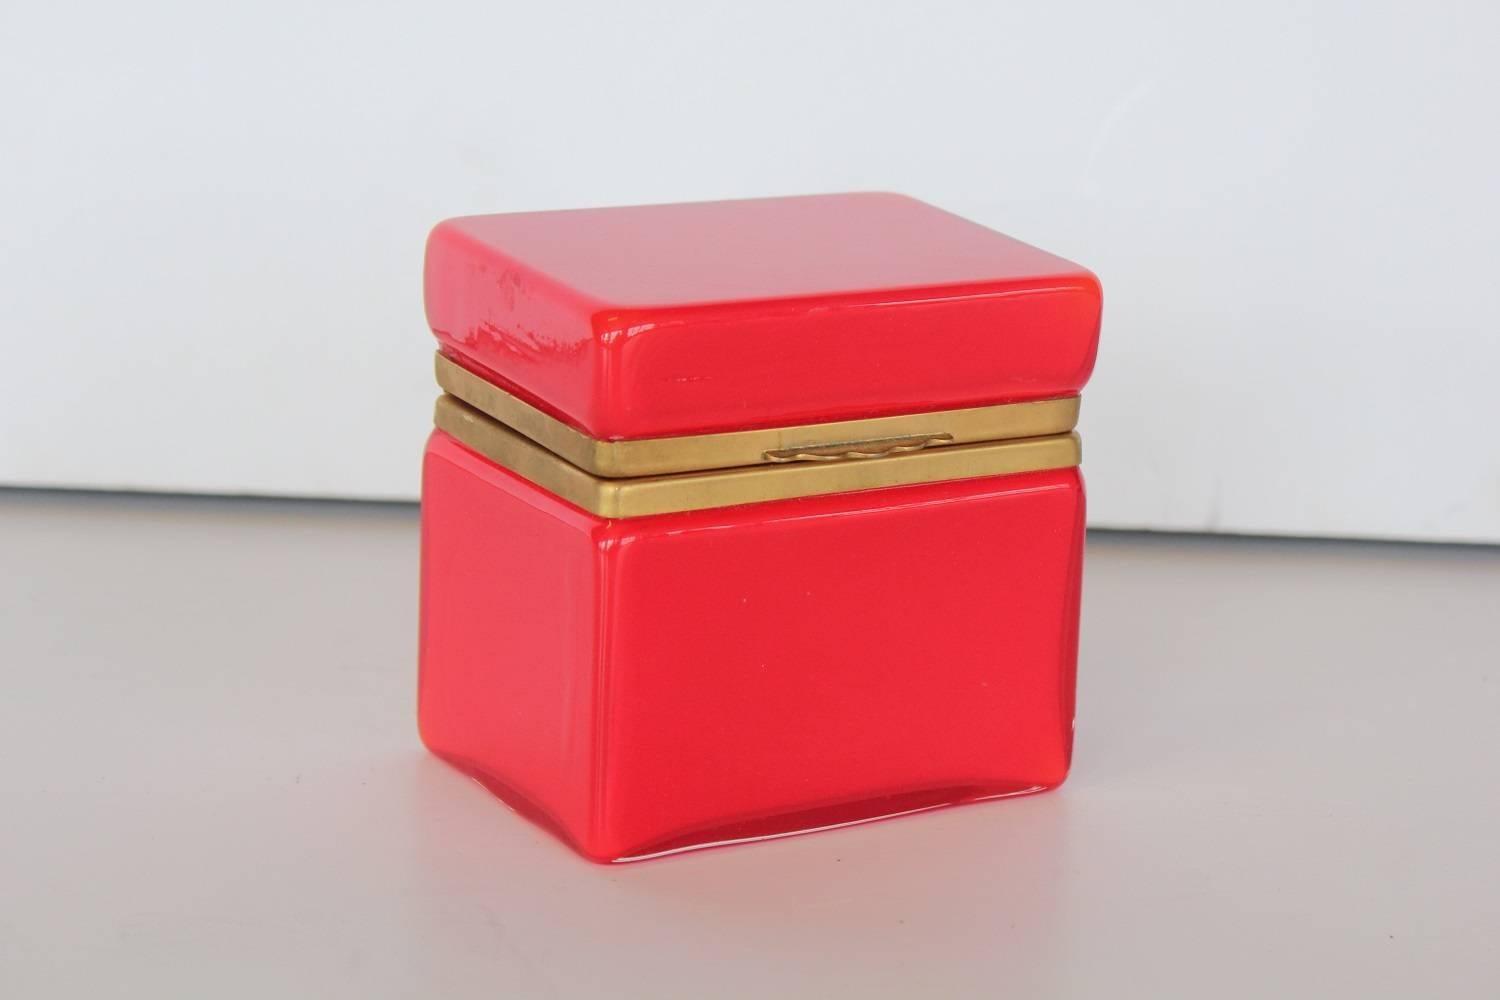 Vintage red Murano glass box.